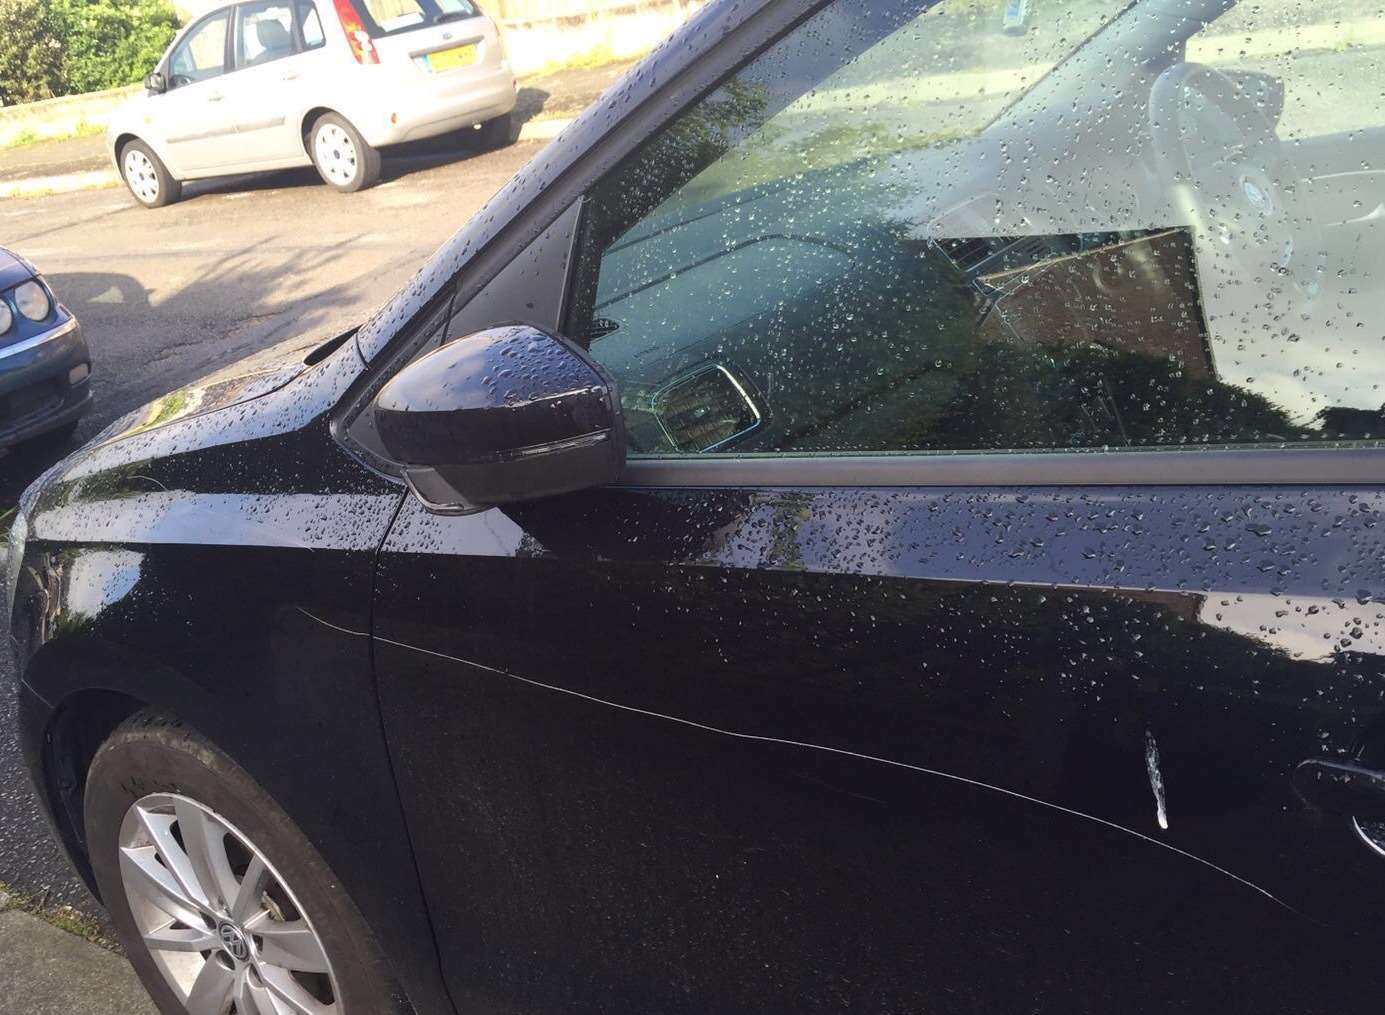 A car on St Aidan's Way, Gravesend, that has been keyed